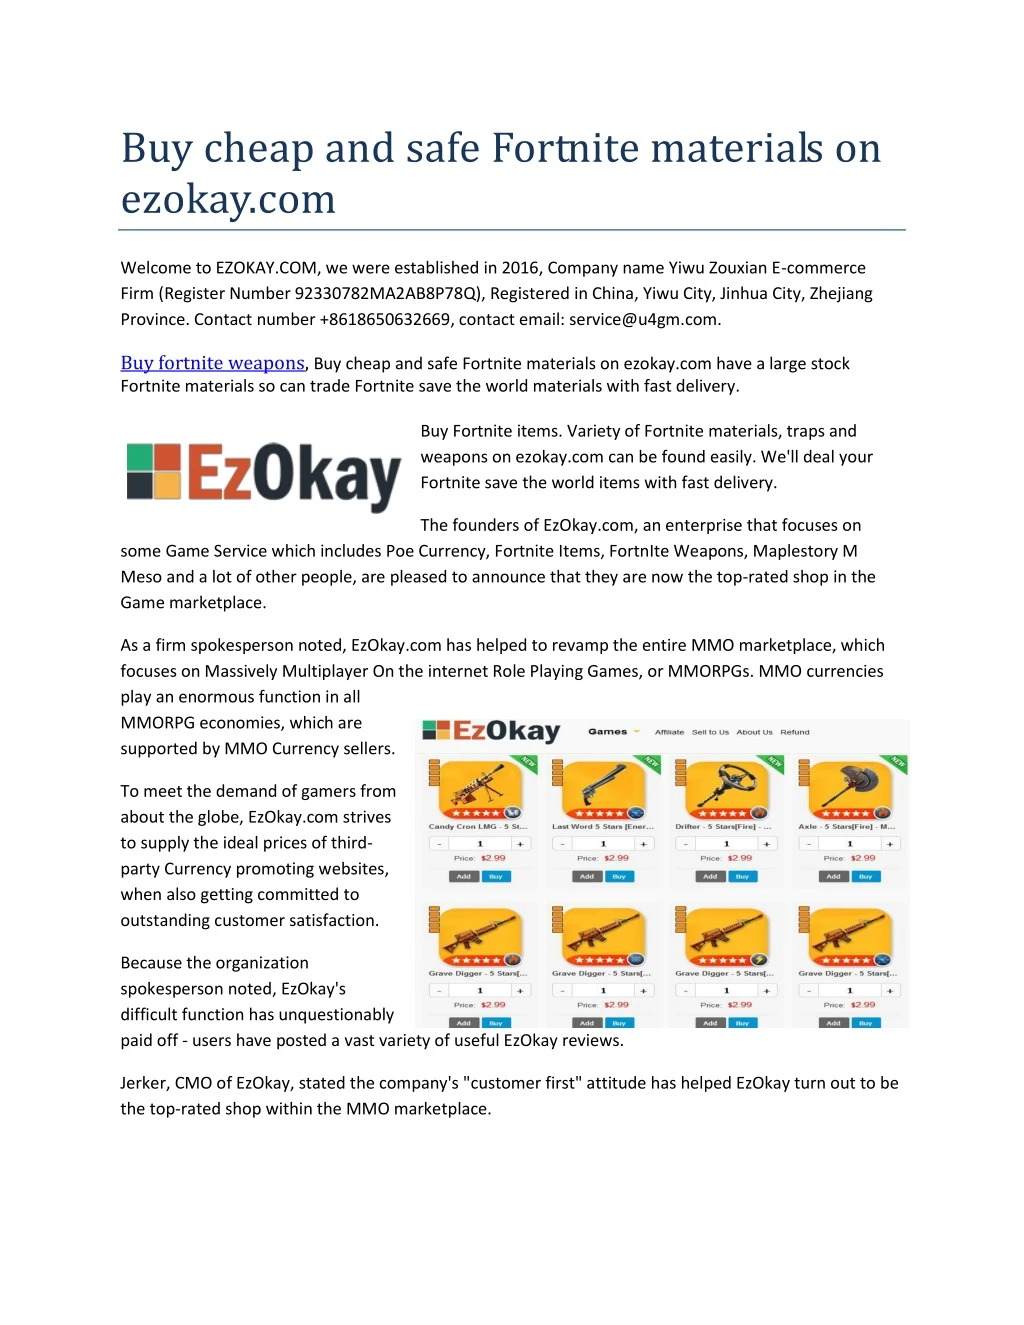 buy cheap and safe fortnite materials on ezokay